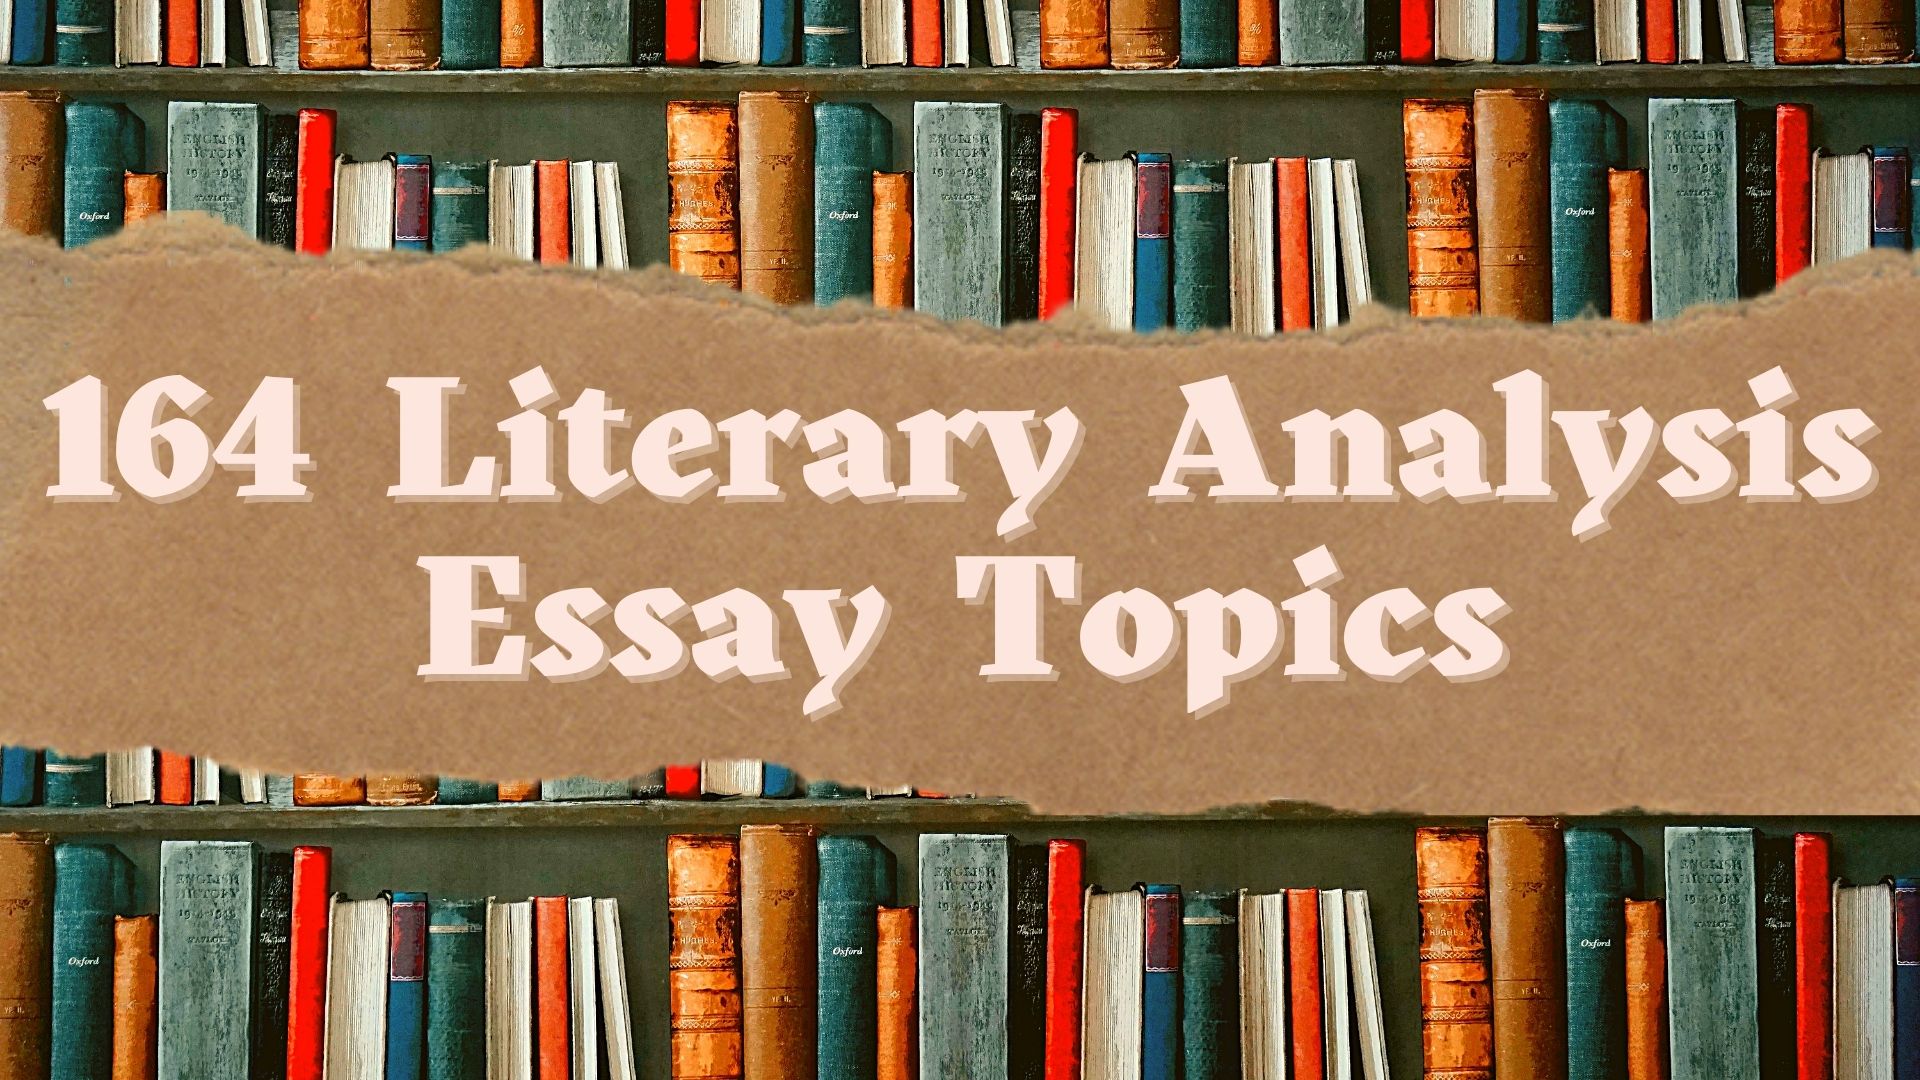 164 Literary Analysis Essay Topics: Ideas To Get You Started